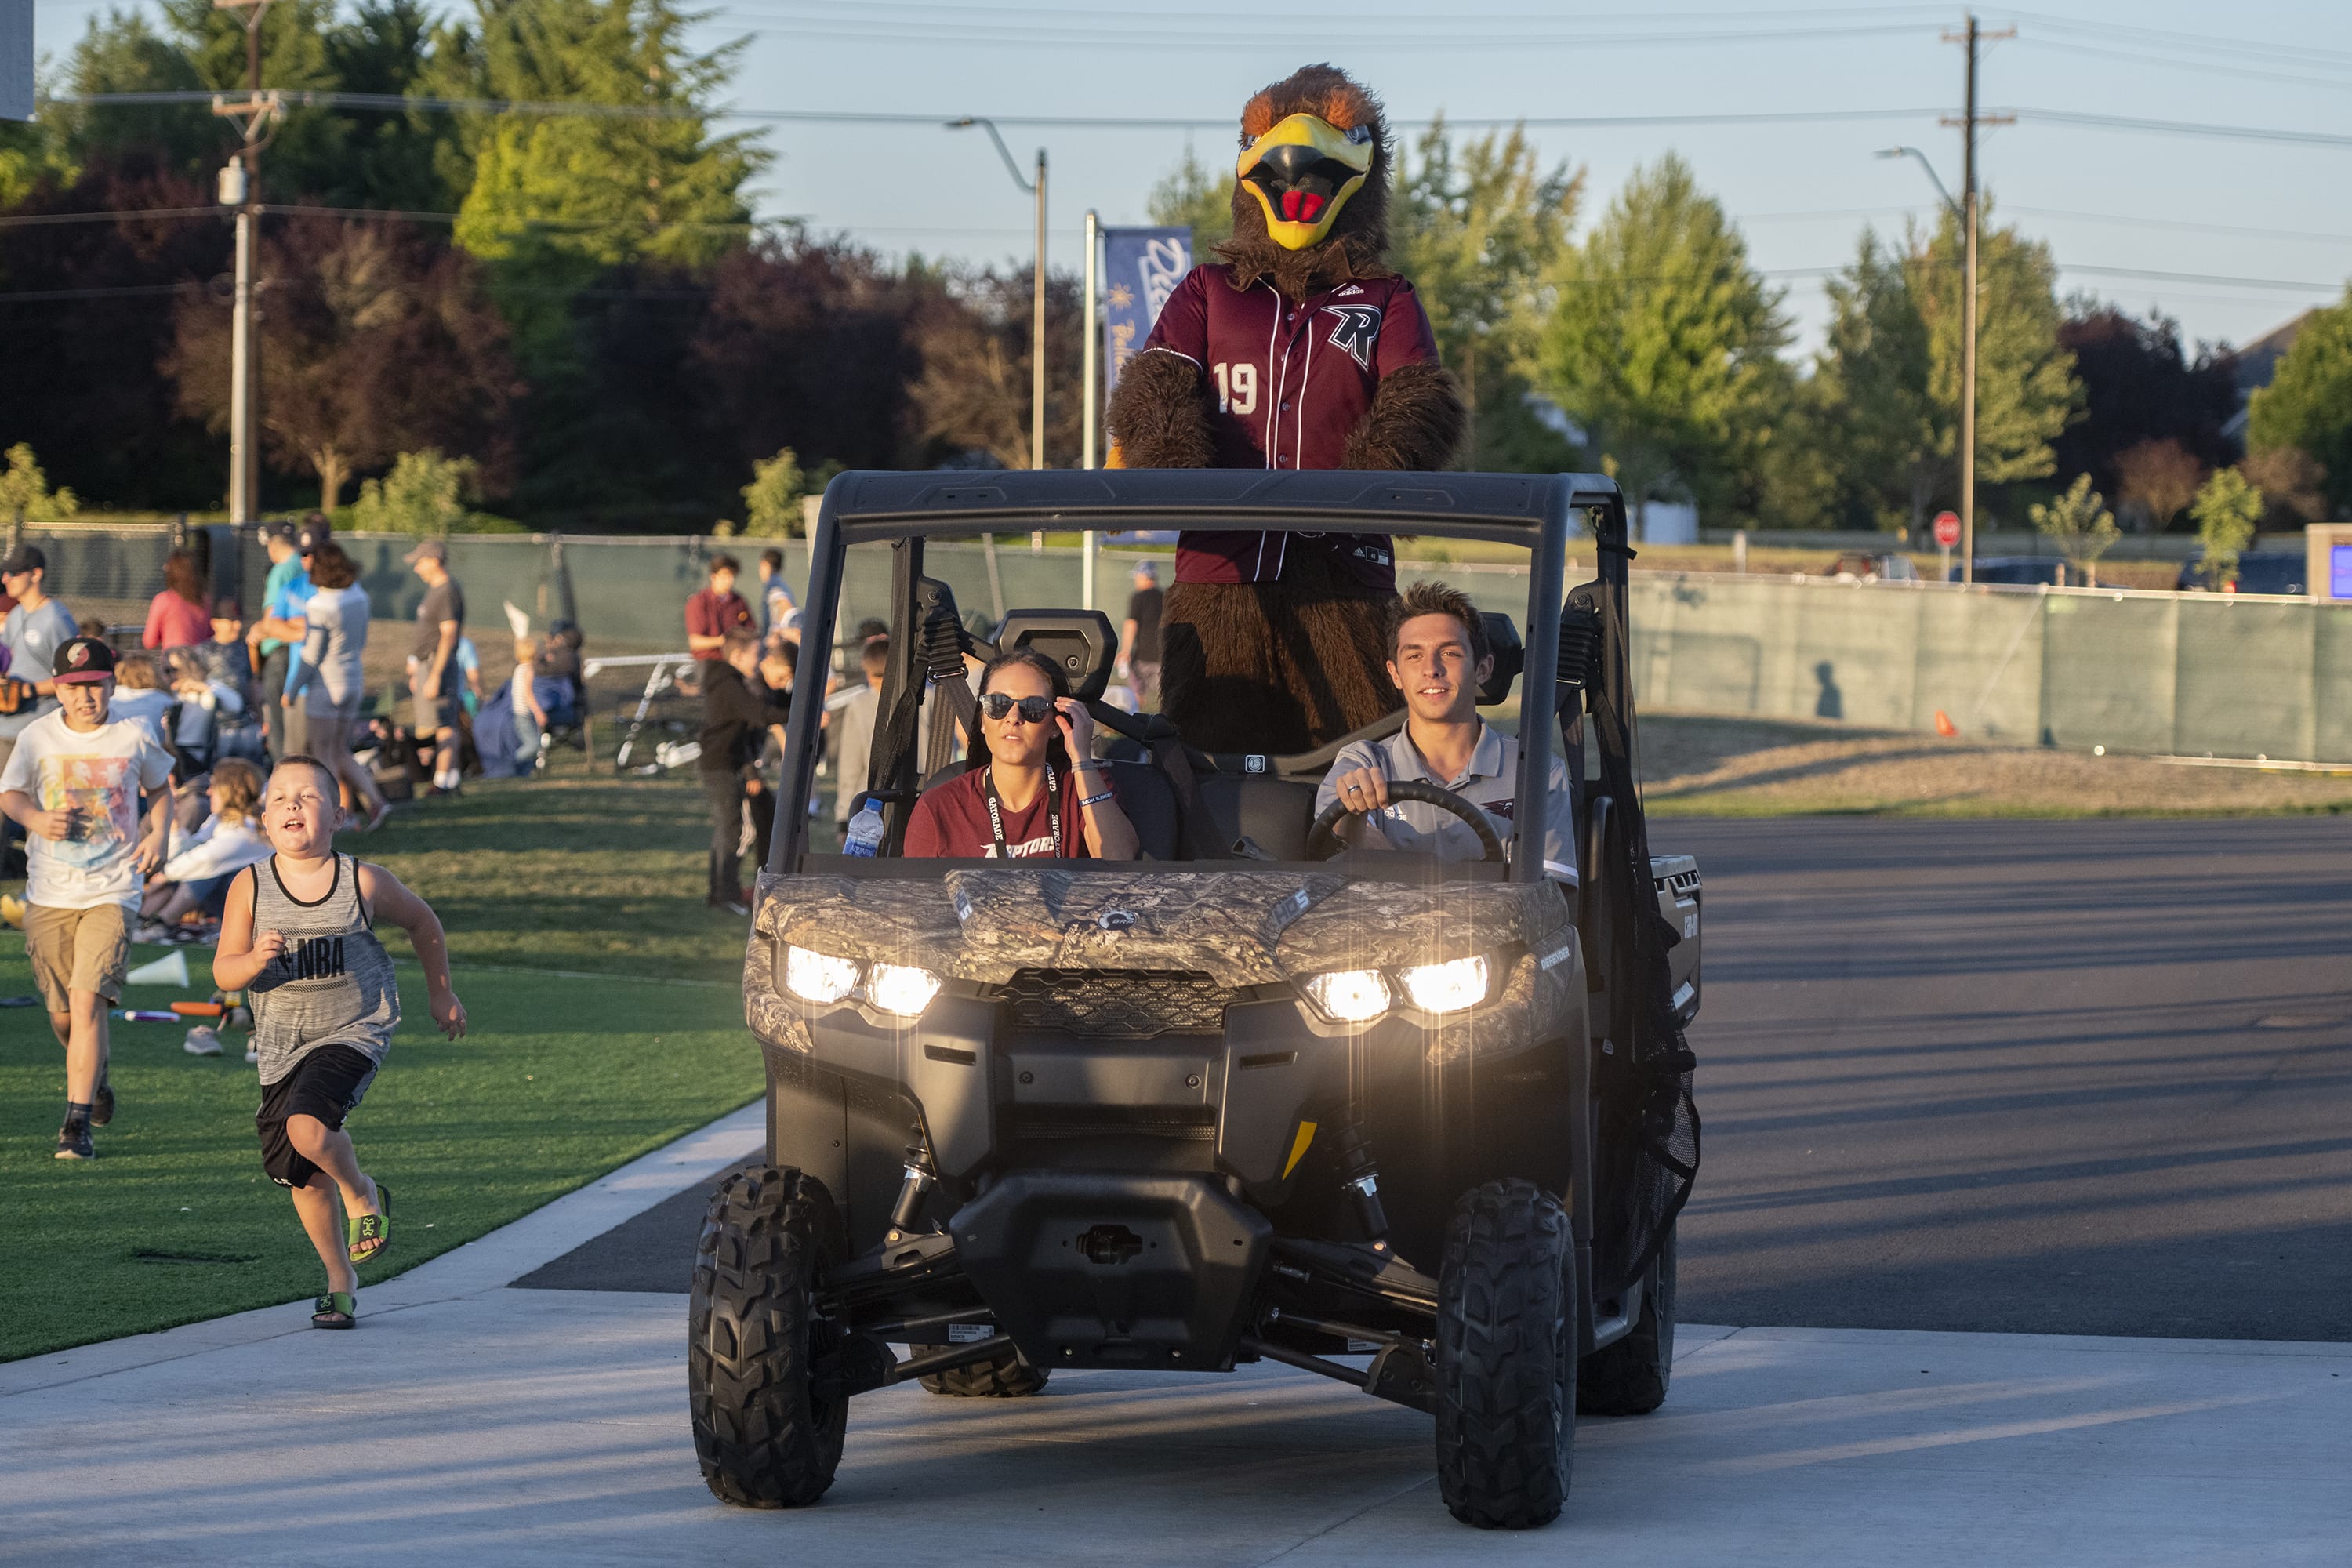 Eight-year-old Trace Musgrave, left, chases Rally the Raptor at the Ridgefield Outdoor Recreational Complex on Friday evening, July 19, 2019. The Raptors defeated the Pickles 5-2.